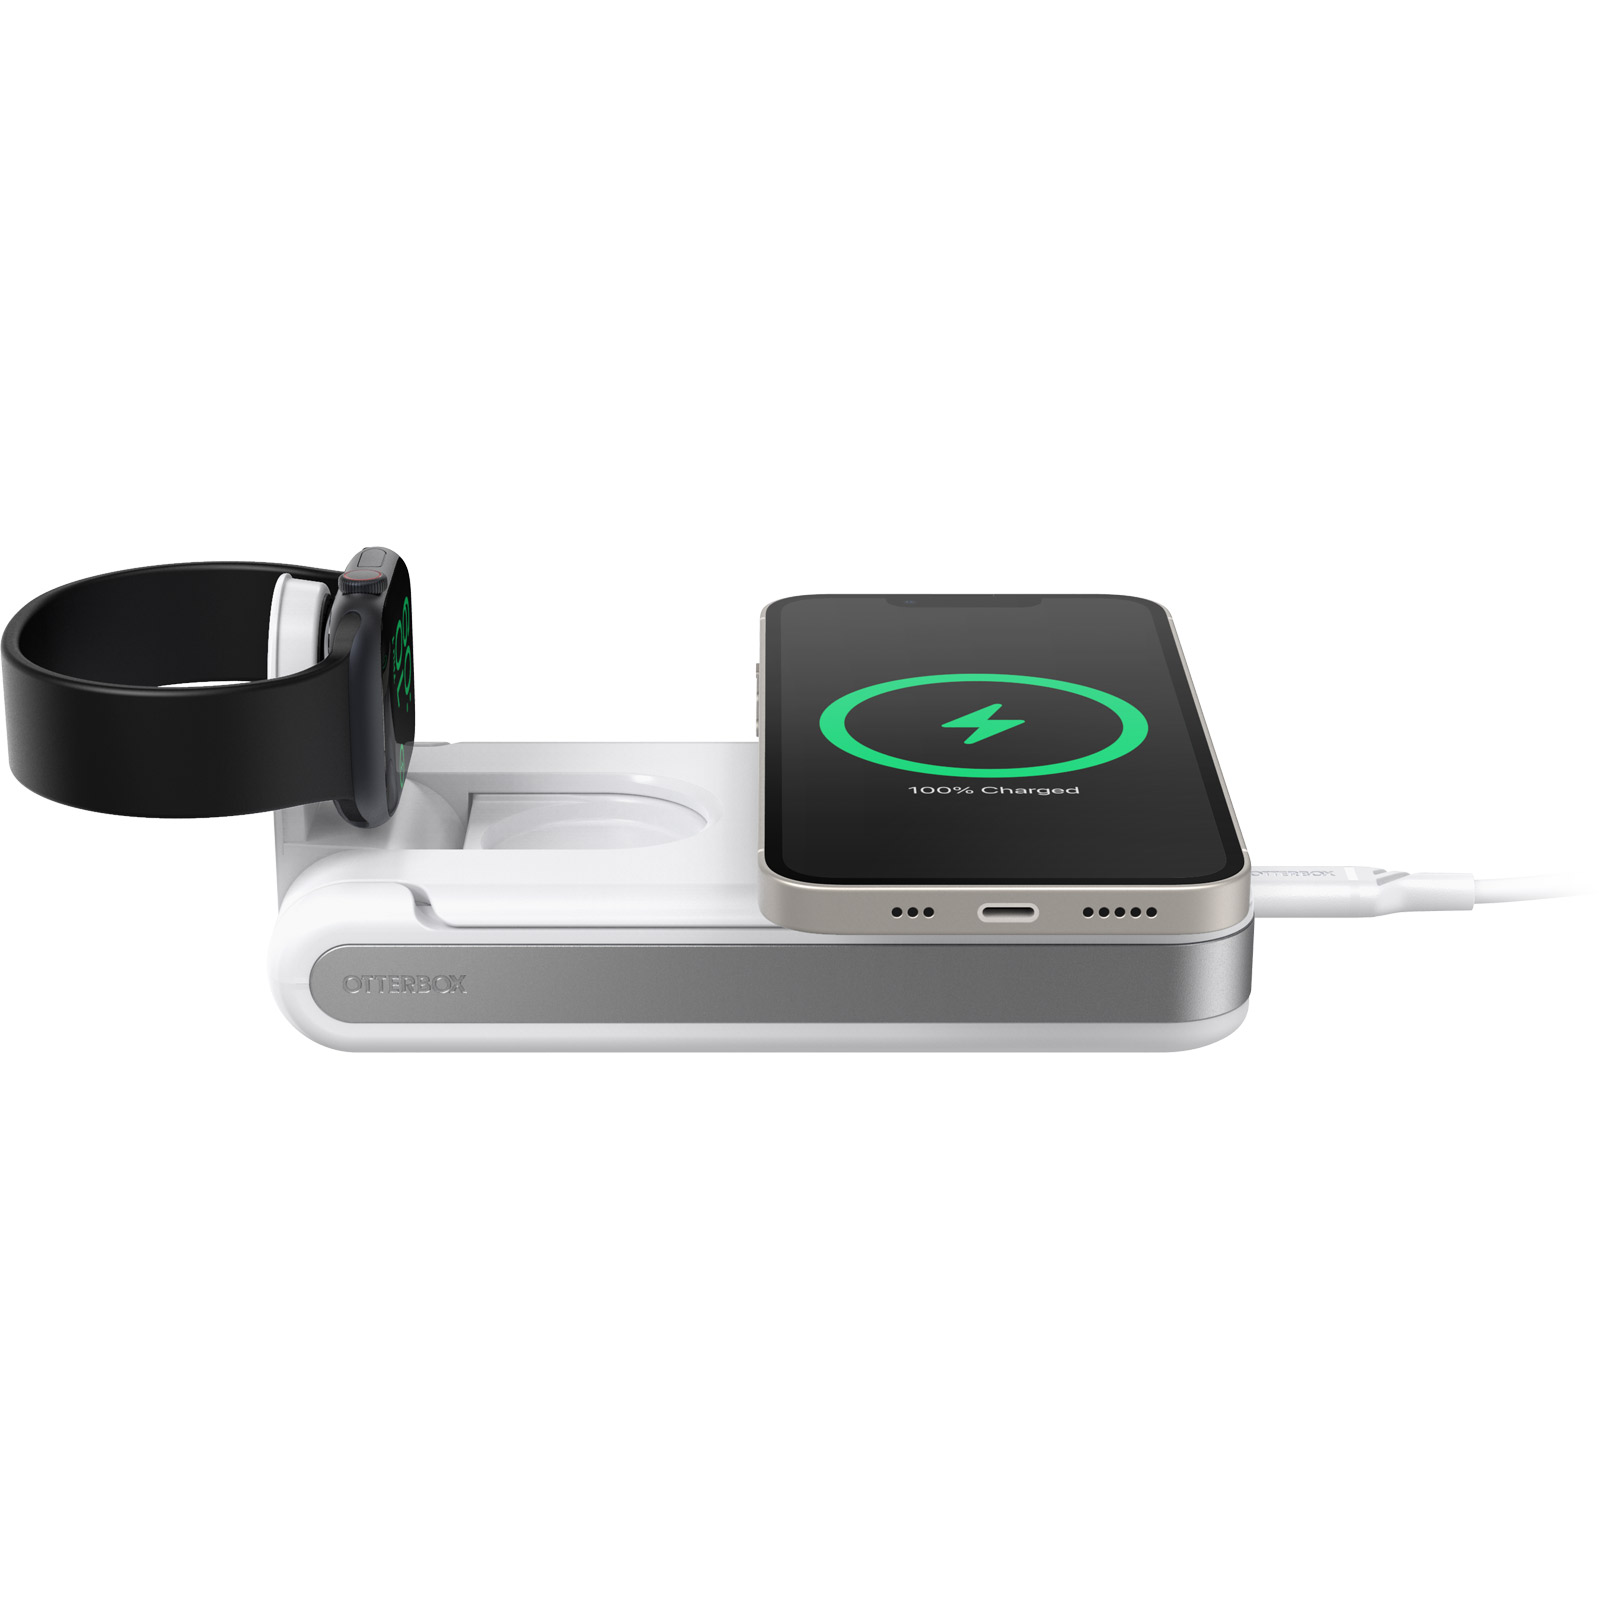 2-in-1 Power Bank with Apple Watch Charger